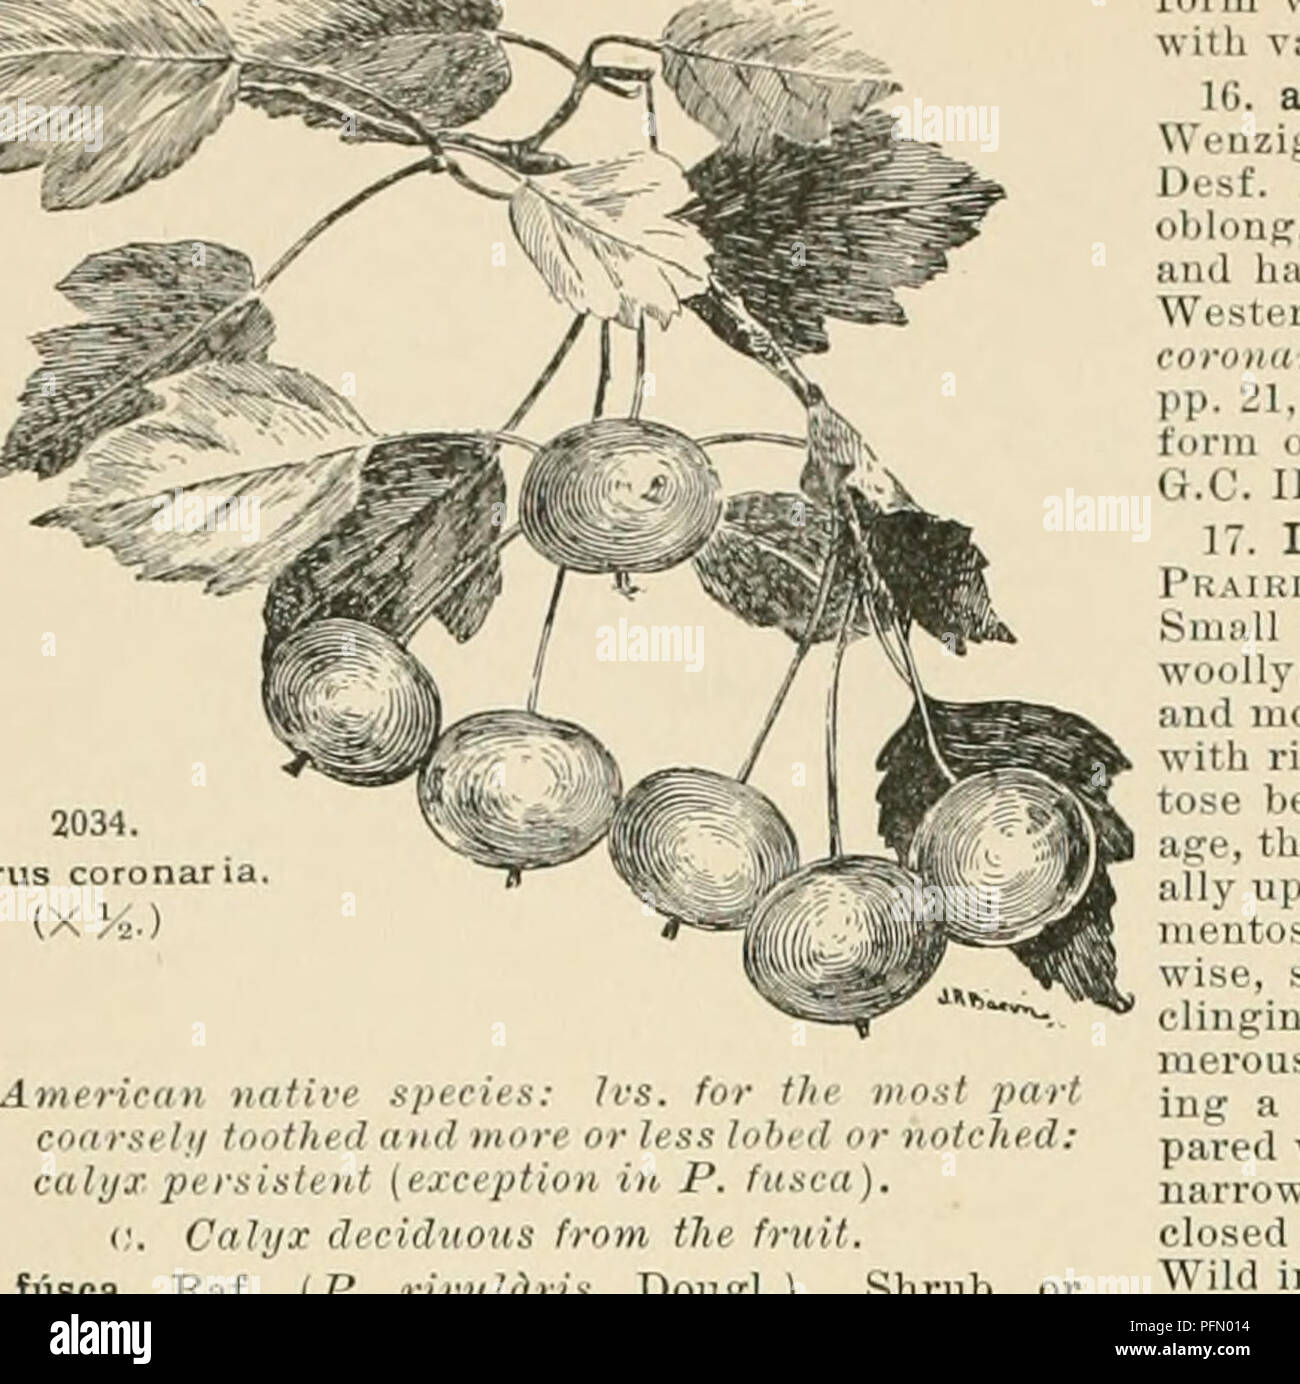 . Cyclopedia of American horticulture, comprising suggestions for cultivation of horticultural plants, descriptions of the species of fruits, vegetables, flowers, and ornamental plants sold in the United States and Canada, together with geographical and biographical sketches. Gardening. Api-ks are ften tw cc tl nat i 1 b zc form w t! iouble fl ai i le (v r  th var cgated leaves An vttratti e spc ir angUBtifdha A t (P cÂ« o ) n var pp 21 IJ S S 4 109 RH 187 410J-A double fld form of wl at appeal s to 1 e th G C III n 4 â species IS figured in C 1 1 1 14 fiiBca Rif (P n small t e et 1 es, 30-40 Stock Photo